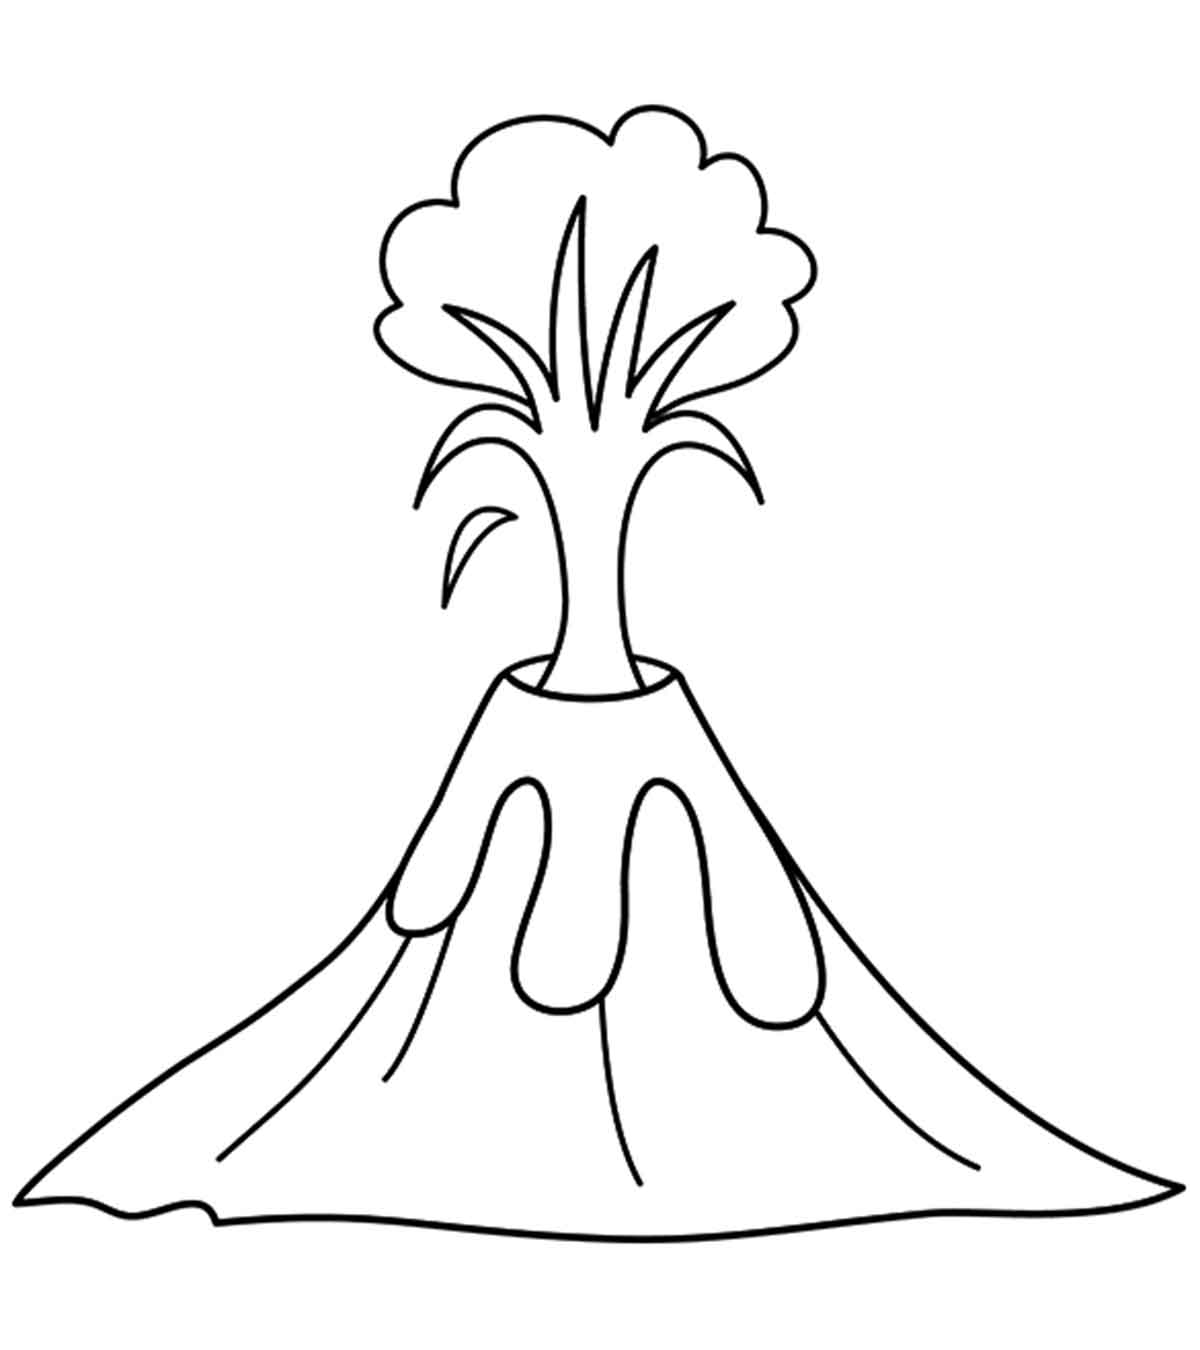 10 Amazing Volcano Coloring Pages To Keep Your Little One Busy_image